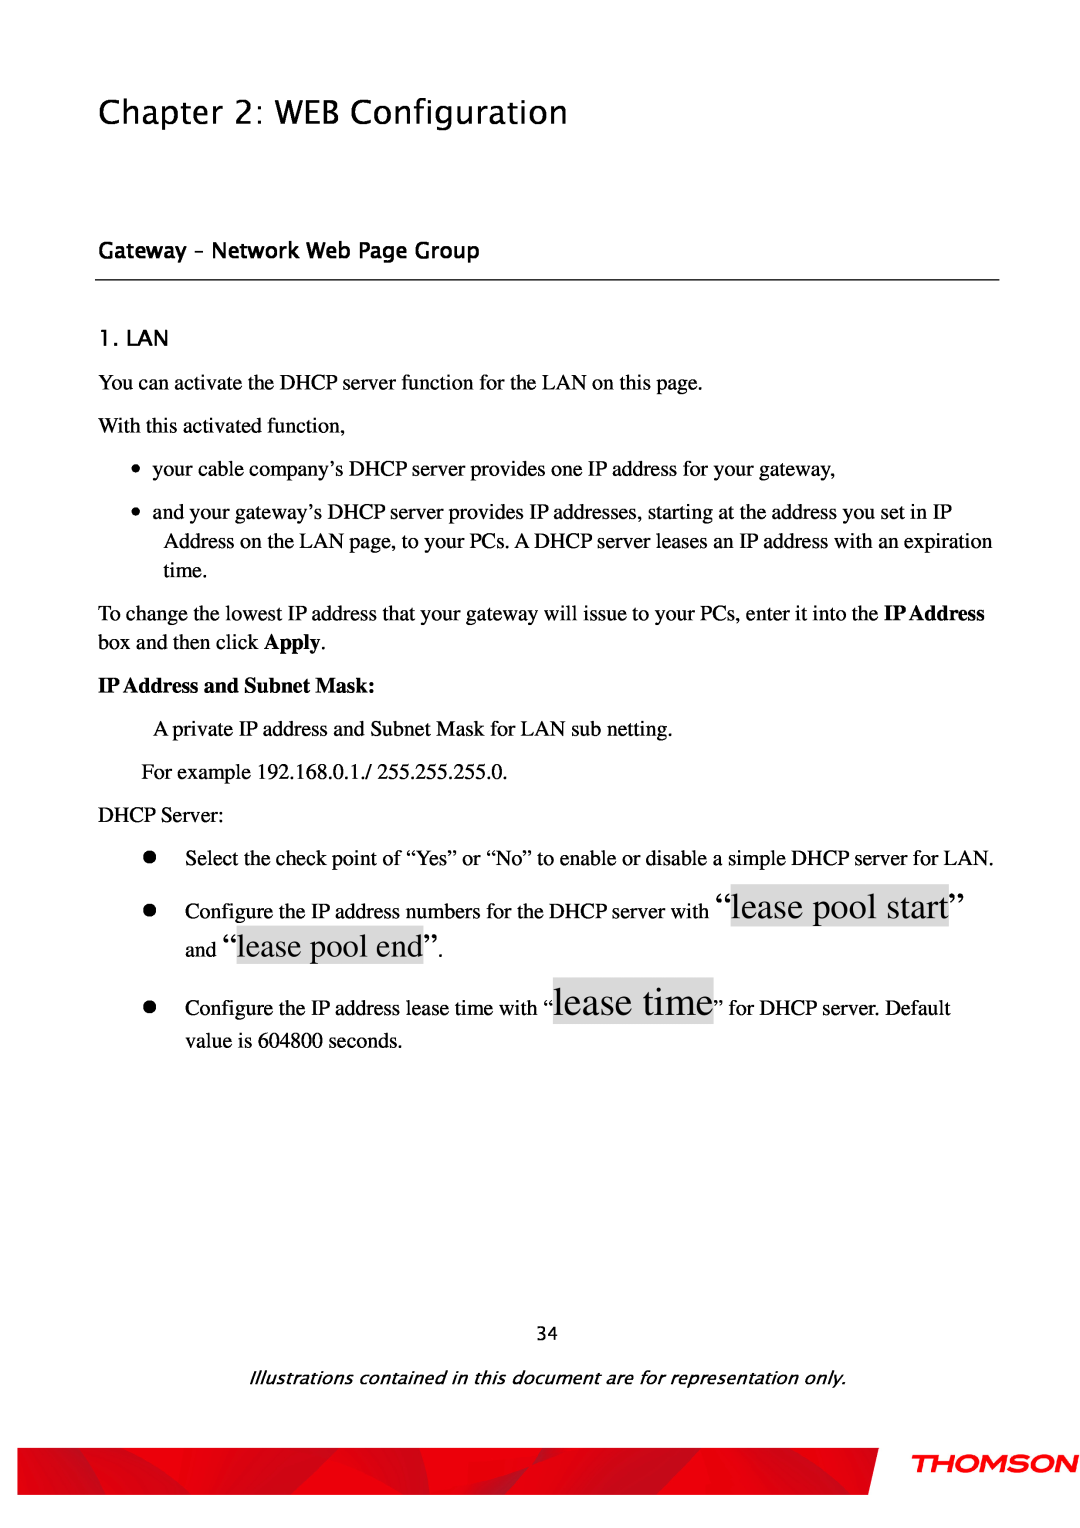 Gateway TWG870 user manual IP Address and Subnet Mask, WEB Configuration, and “lease pool end” 